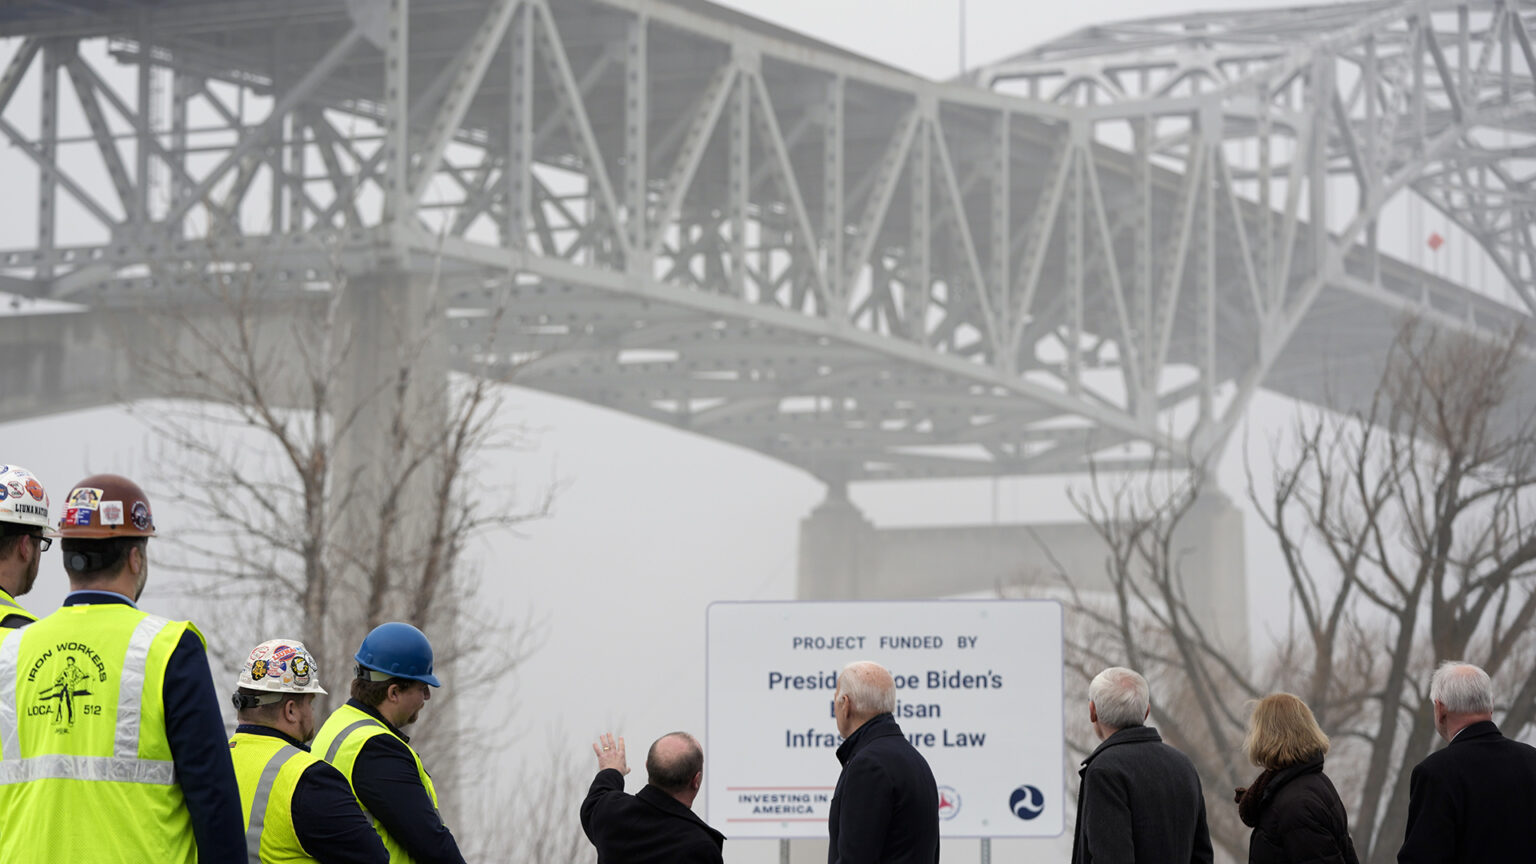 Joe Biden stands among four people wearing safety vests and four other people who are facing leafless trees, a sign reading Project Funded by President Joe Biden's Bipartisan Infrastructure Law and the concrete pillars and steel girder superstructure of a bridge partially obscured in fog.